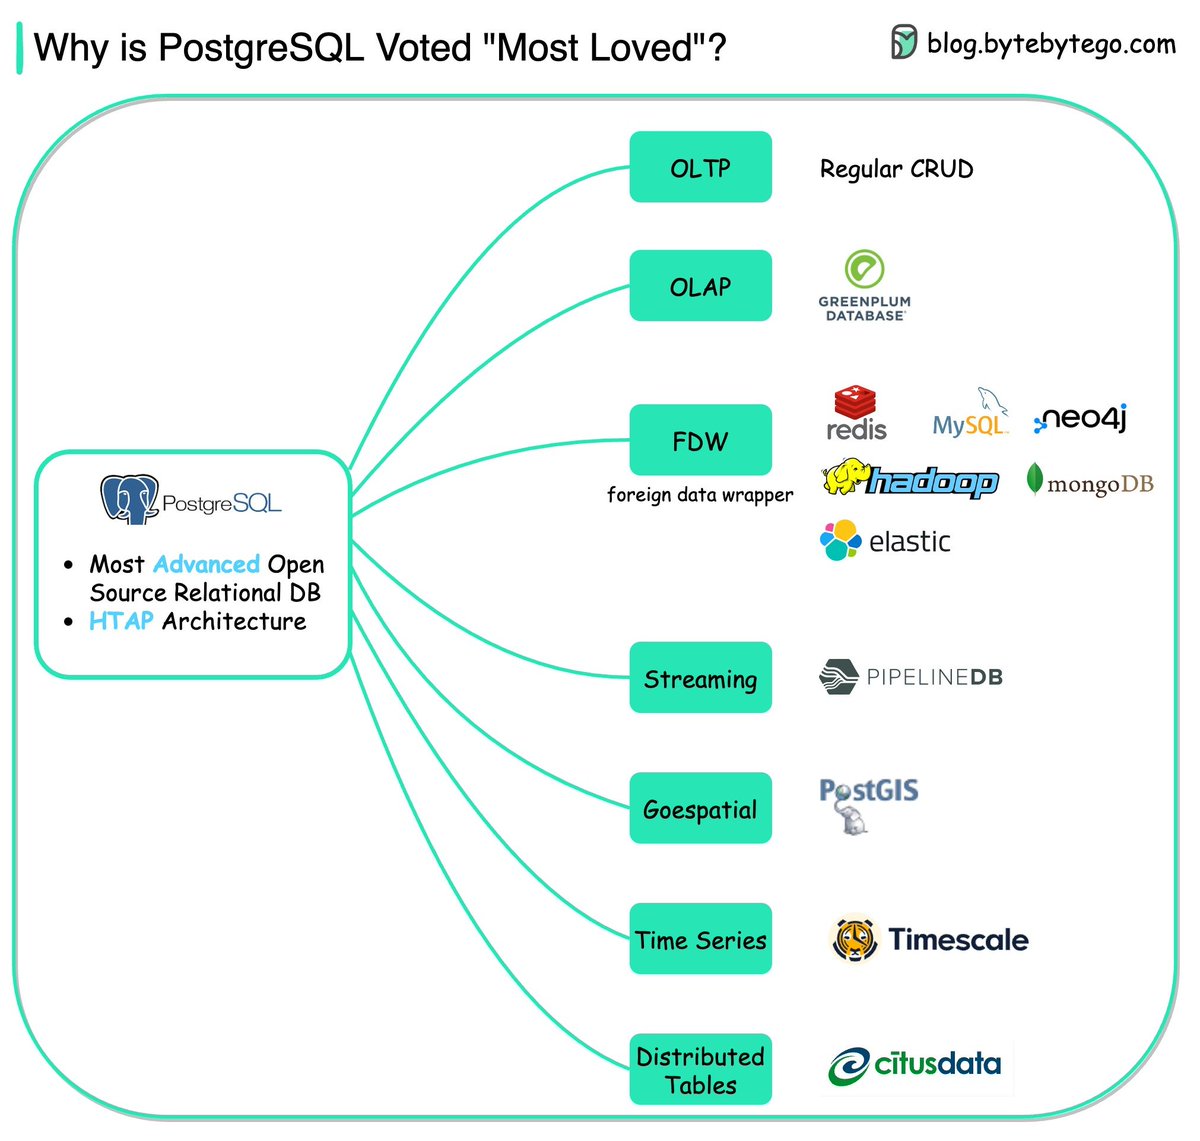 Why is PostgreSQL voted the 𝐦𝐨𝐬𝐭 𝐥𝐨𝐯𝐞𝐝 𝐝𝐚𝐭𝐚𝐛𝐚𝐬𝐞 by Stackoverflow Developer Survey? The chart shows PostgreSQL's wide range of uses - it's a single database that covers nearly 𝐚𝐥𝐥 𝐭𝐡𝐞 𝐮𝐬𝐞 𝐜𝐚𝐬𝐞𝐬 developers need. 🔹OLTP (Online Transaction…